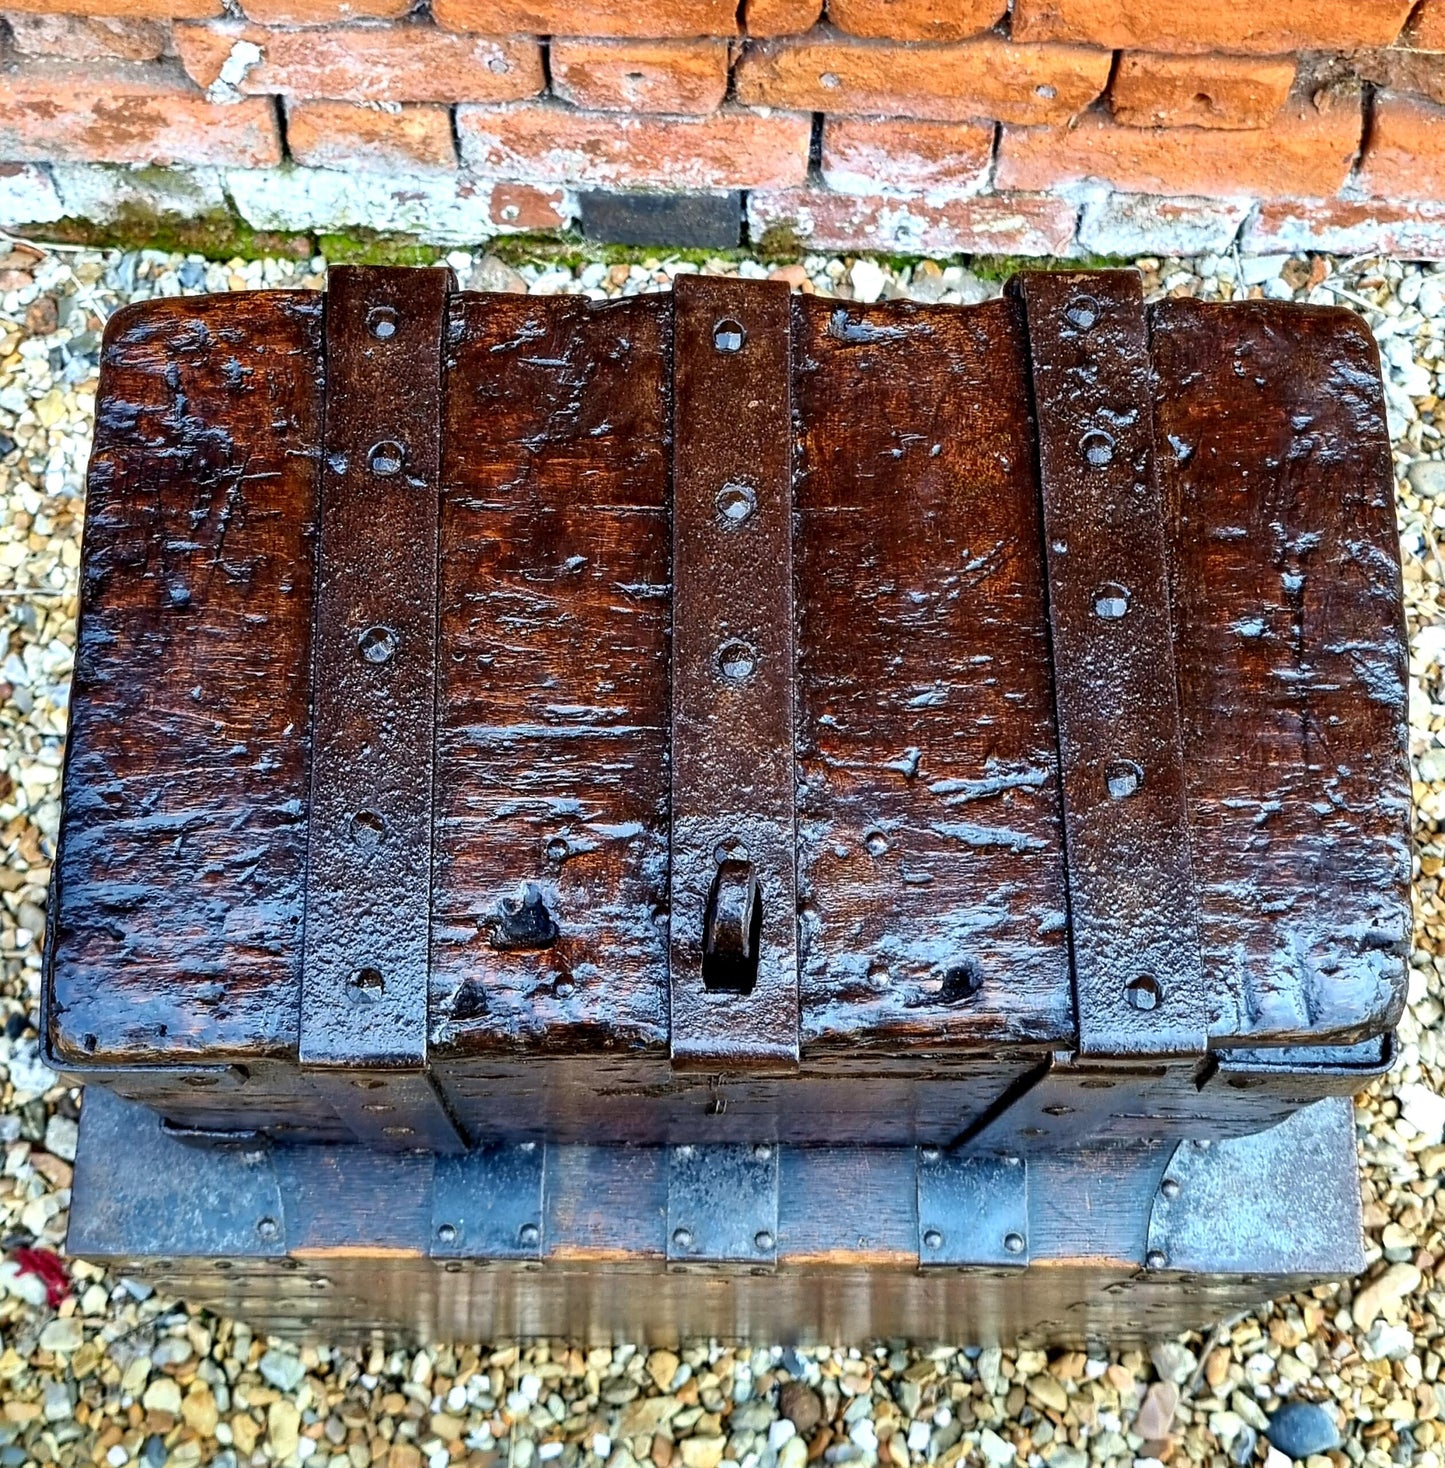 Late 15th Century Antique Oak Strong Box or Alms with Original Ironwork and Iron Bindings